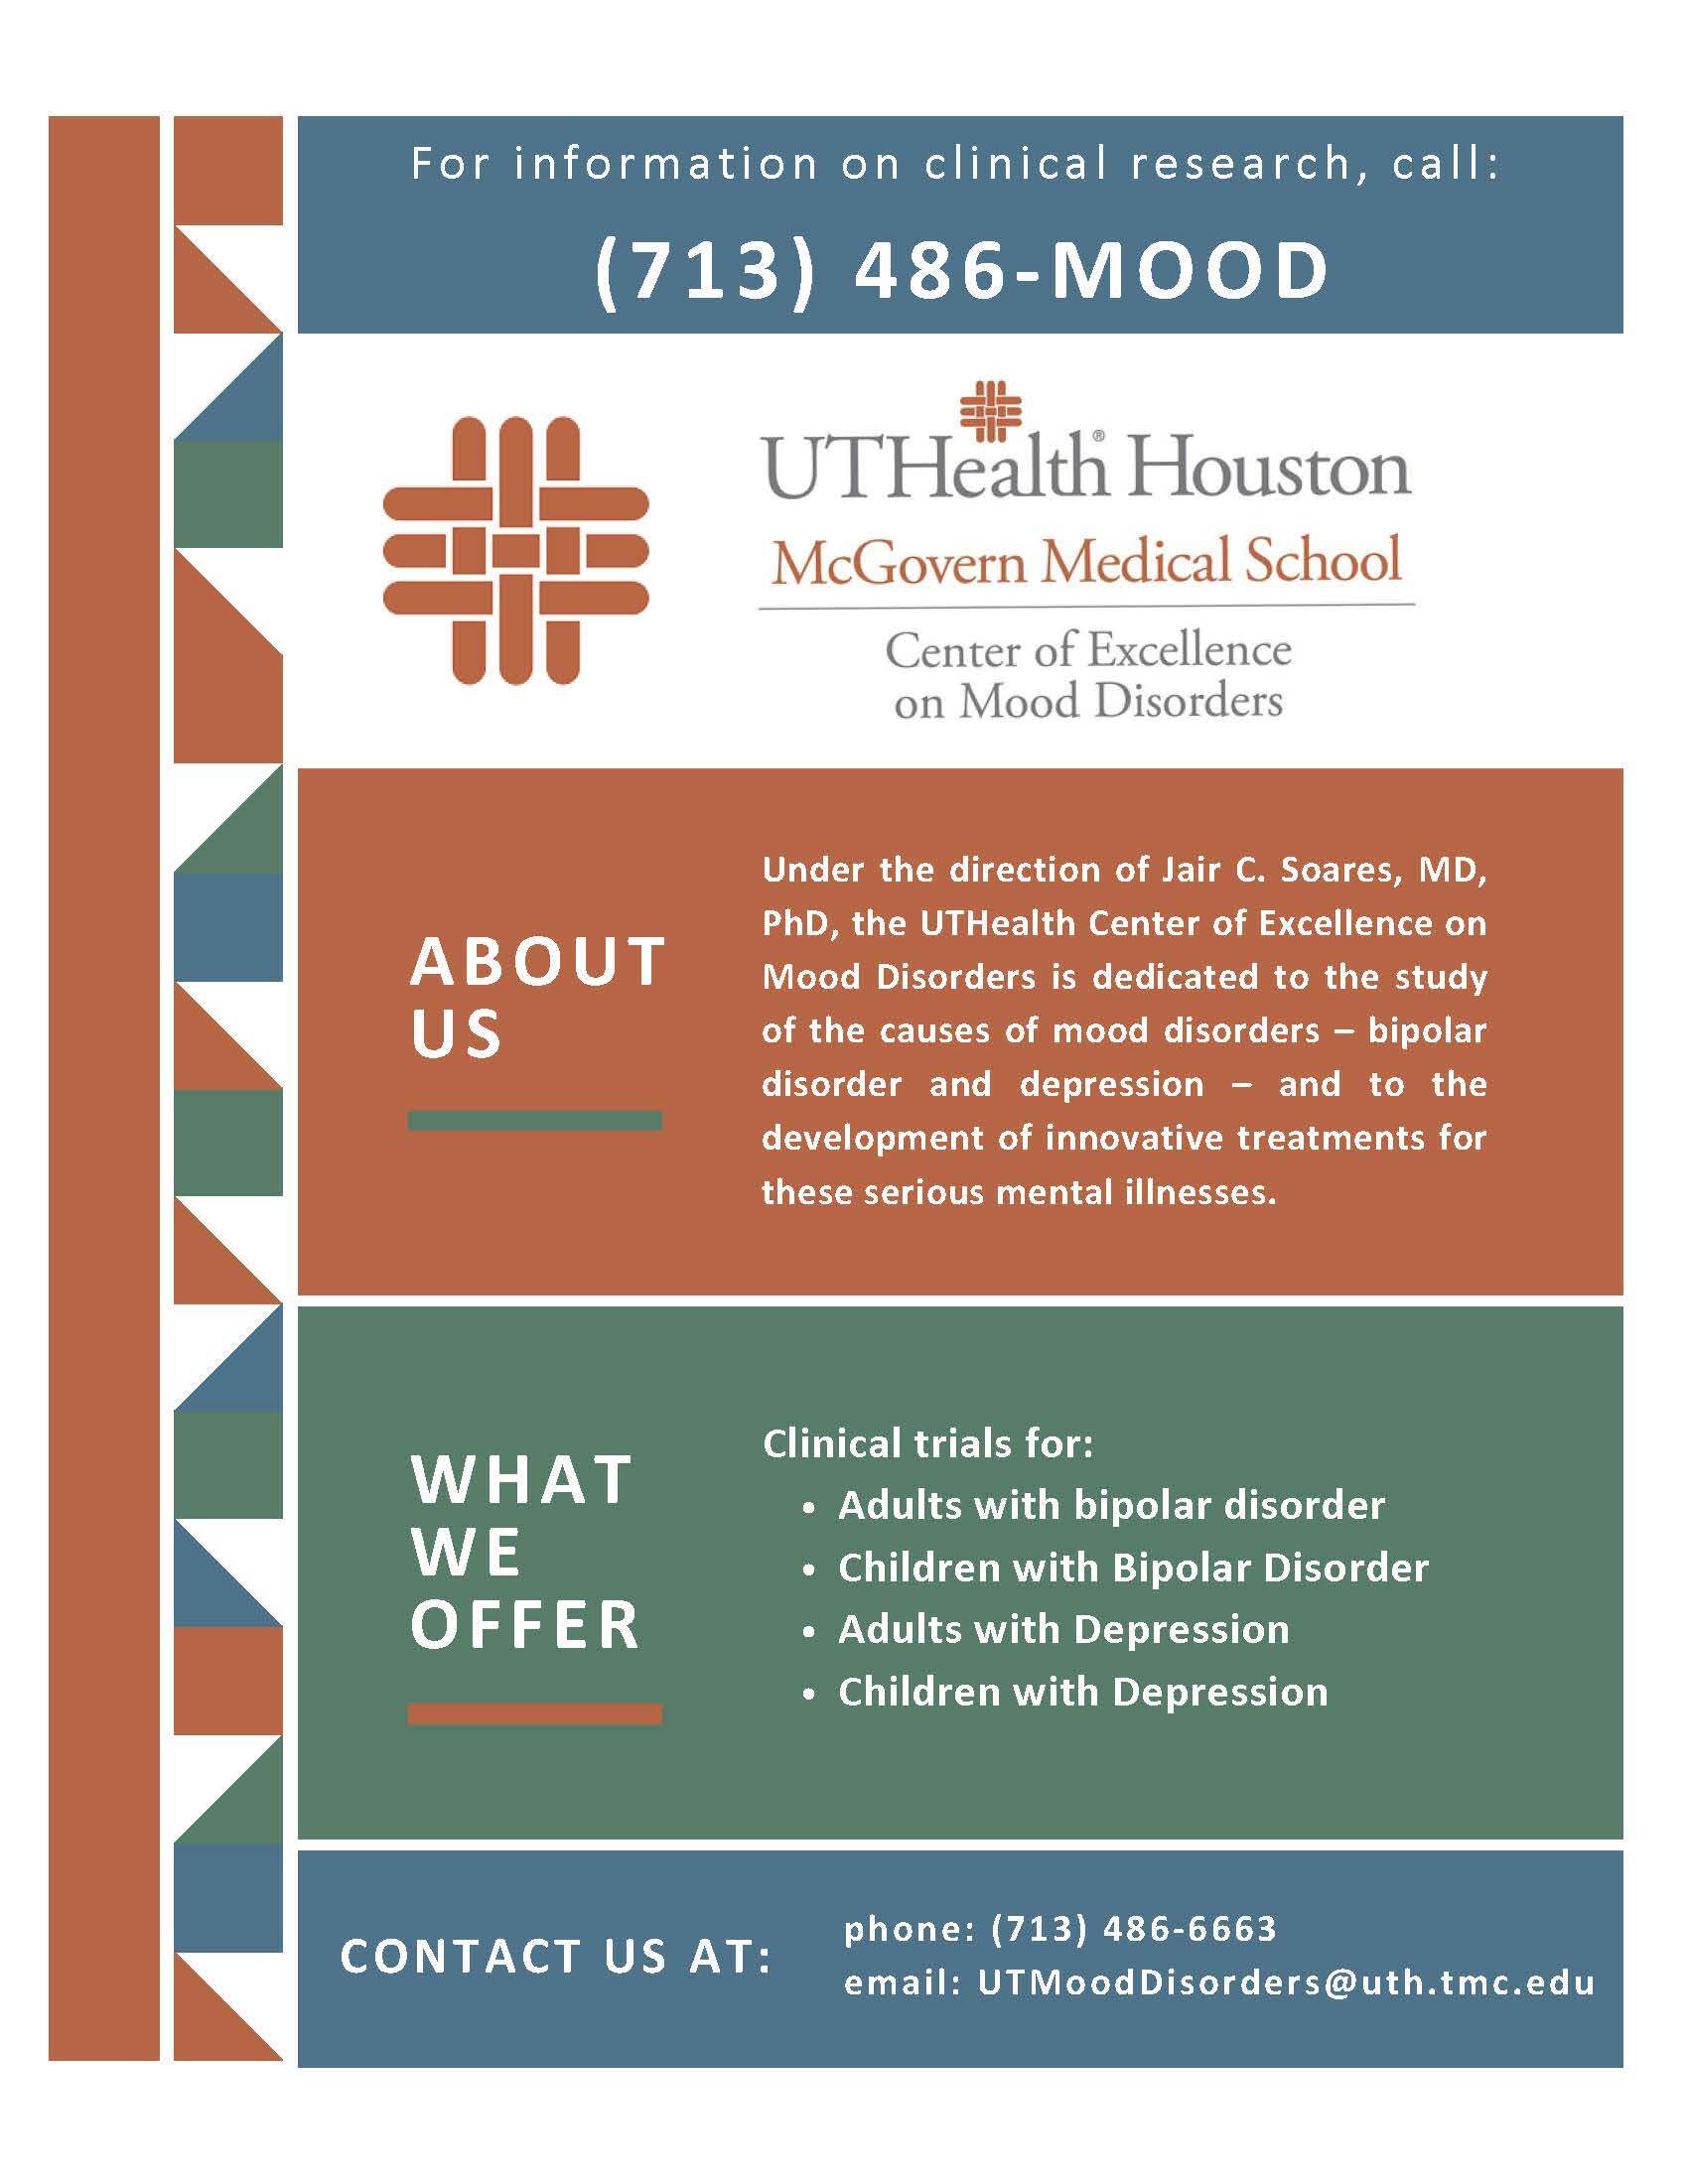 Center for excellence on mood disorders flyer